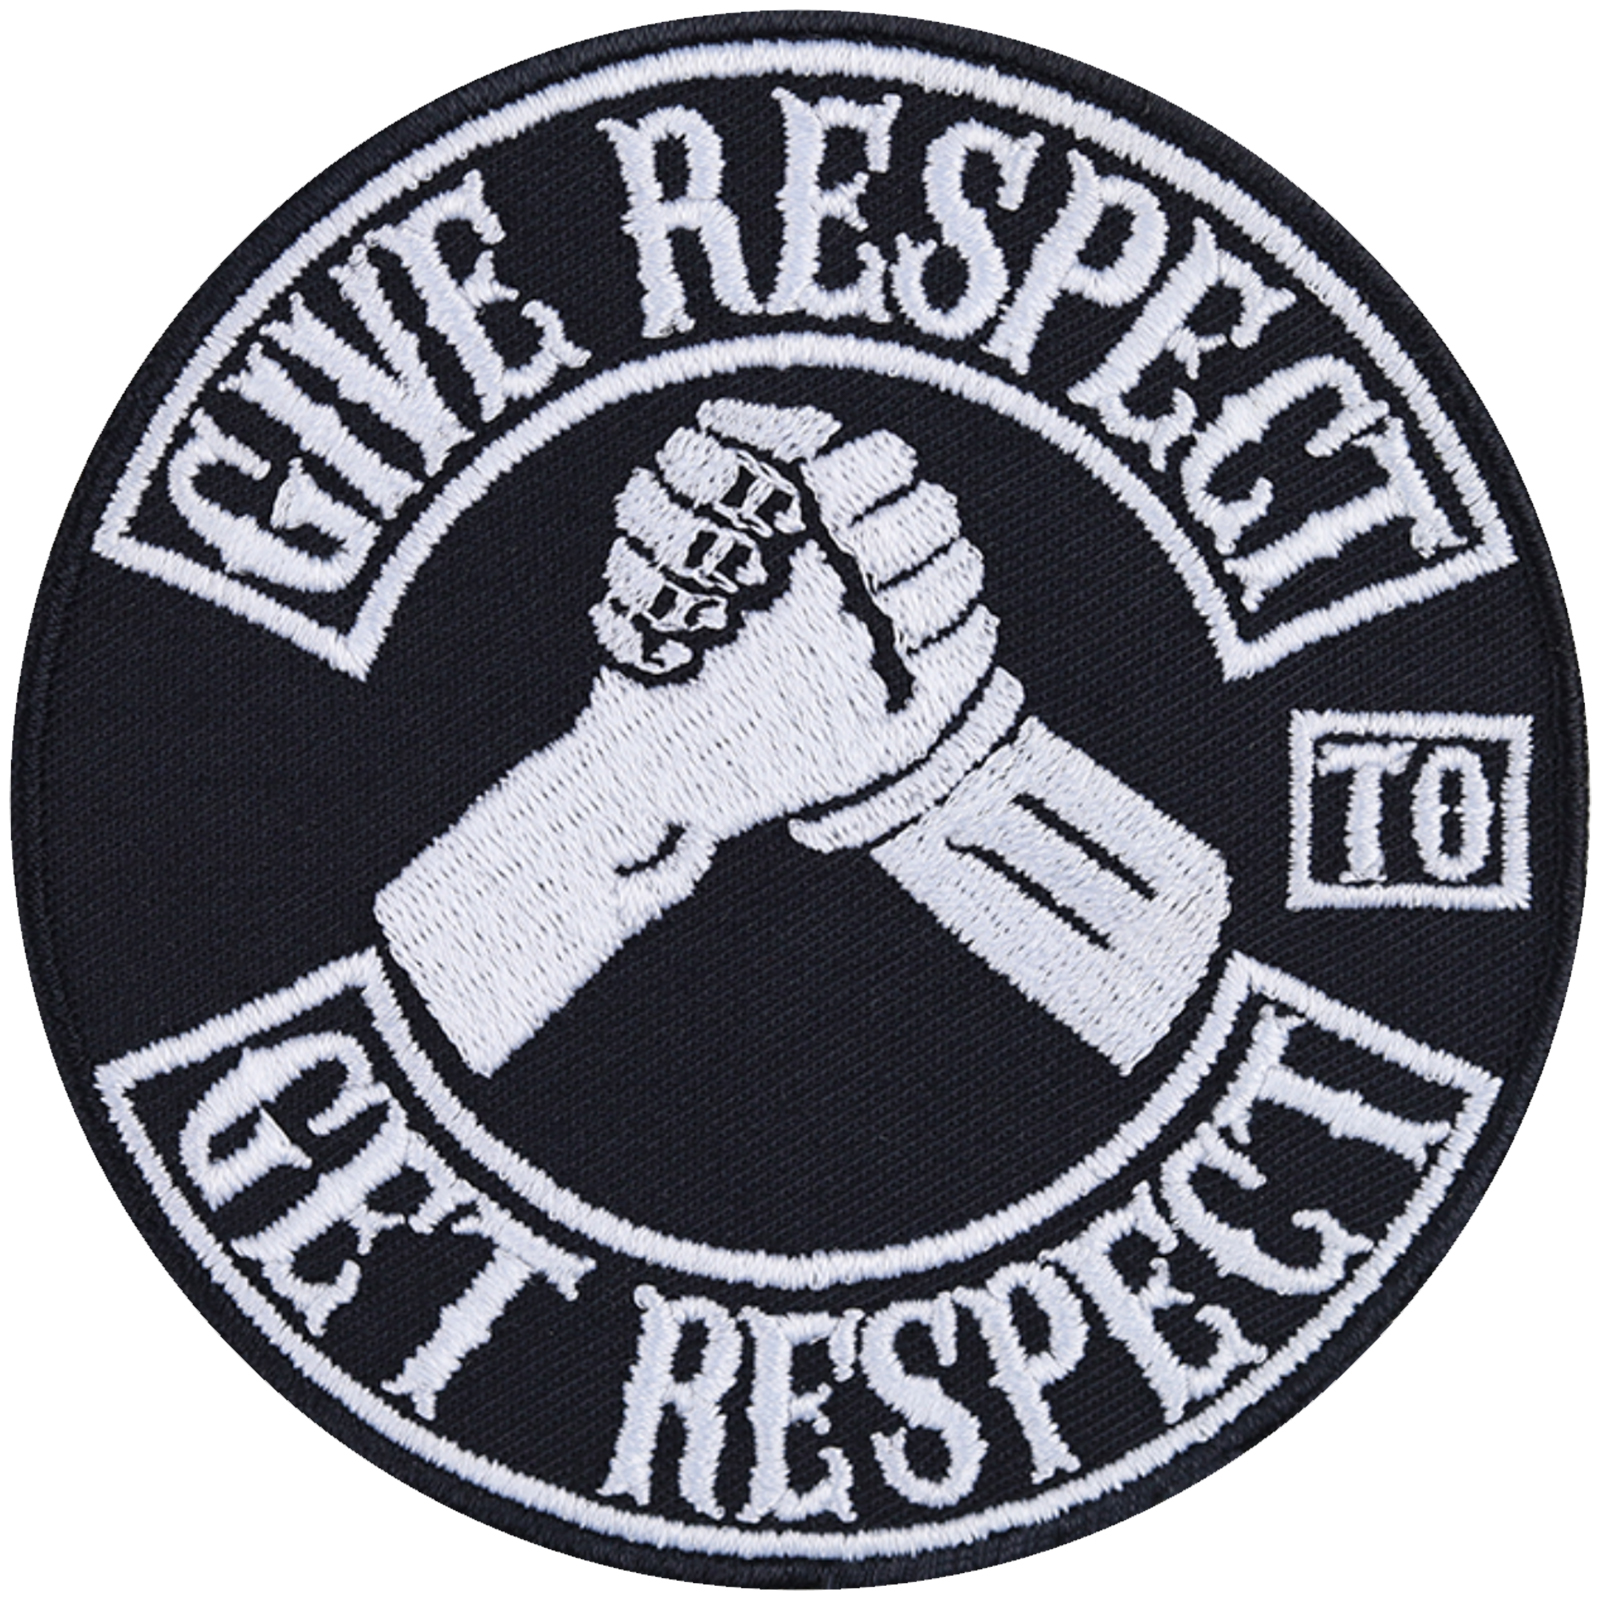 Give respect, to get respect - Patch